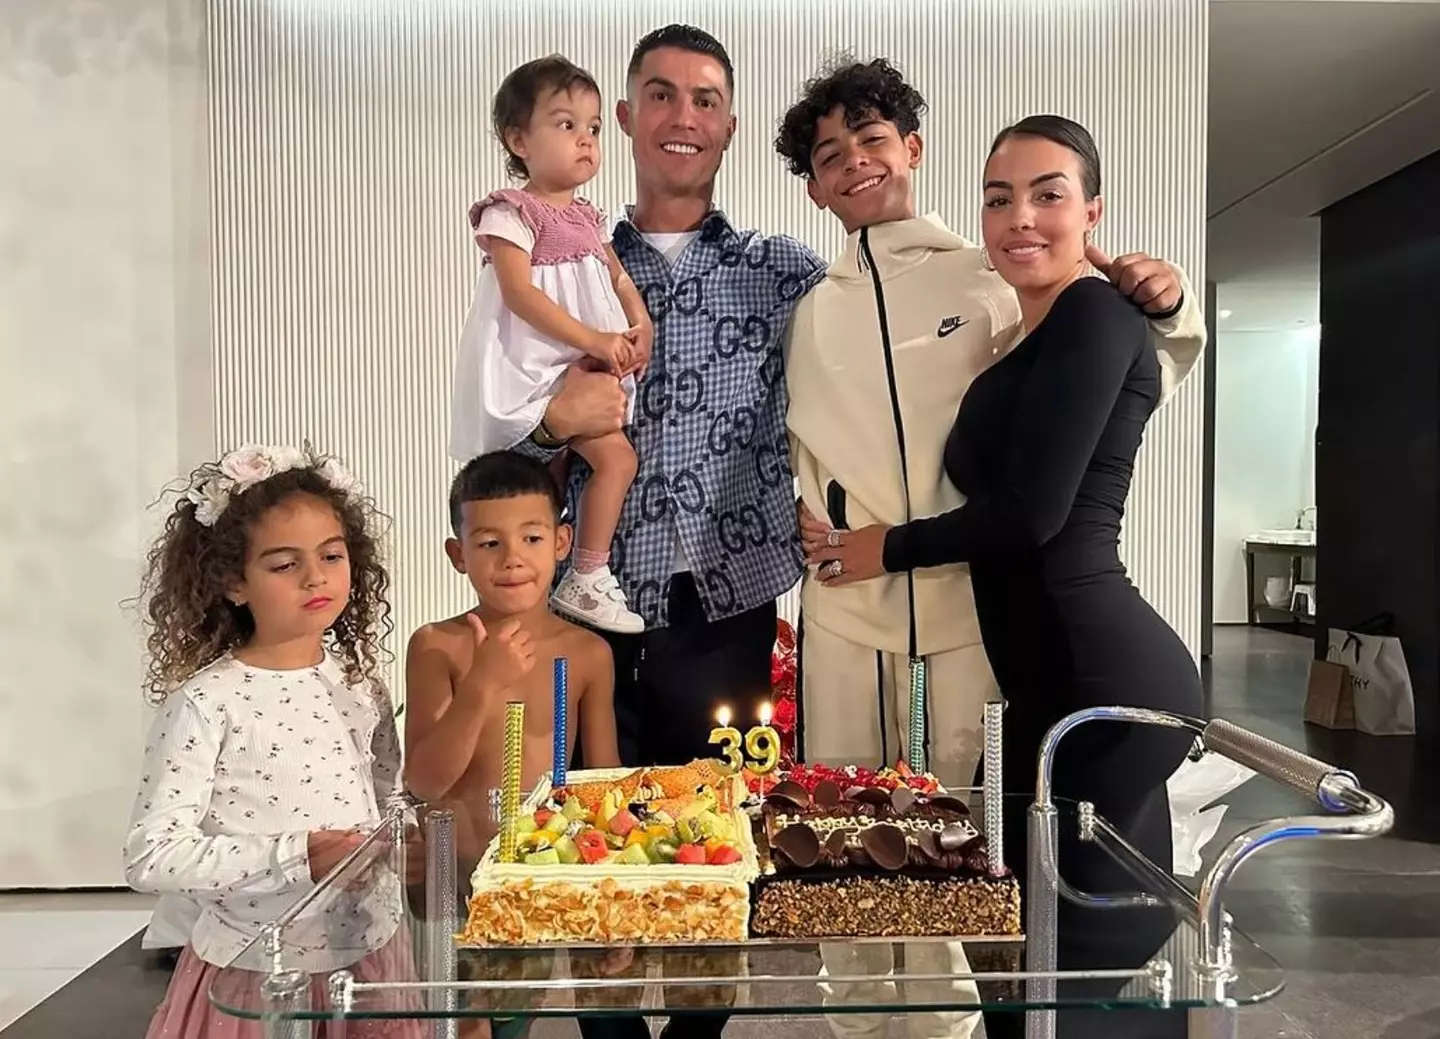 Ronaldo shared the sweet family snap after celebrating his 39th birthday.